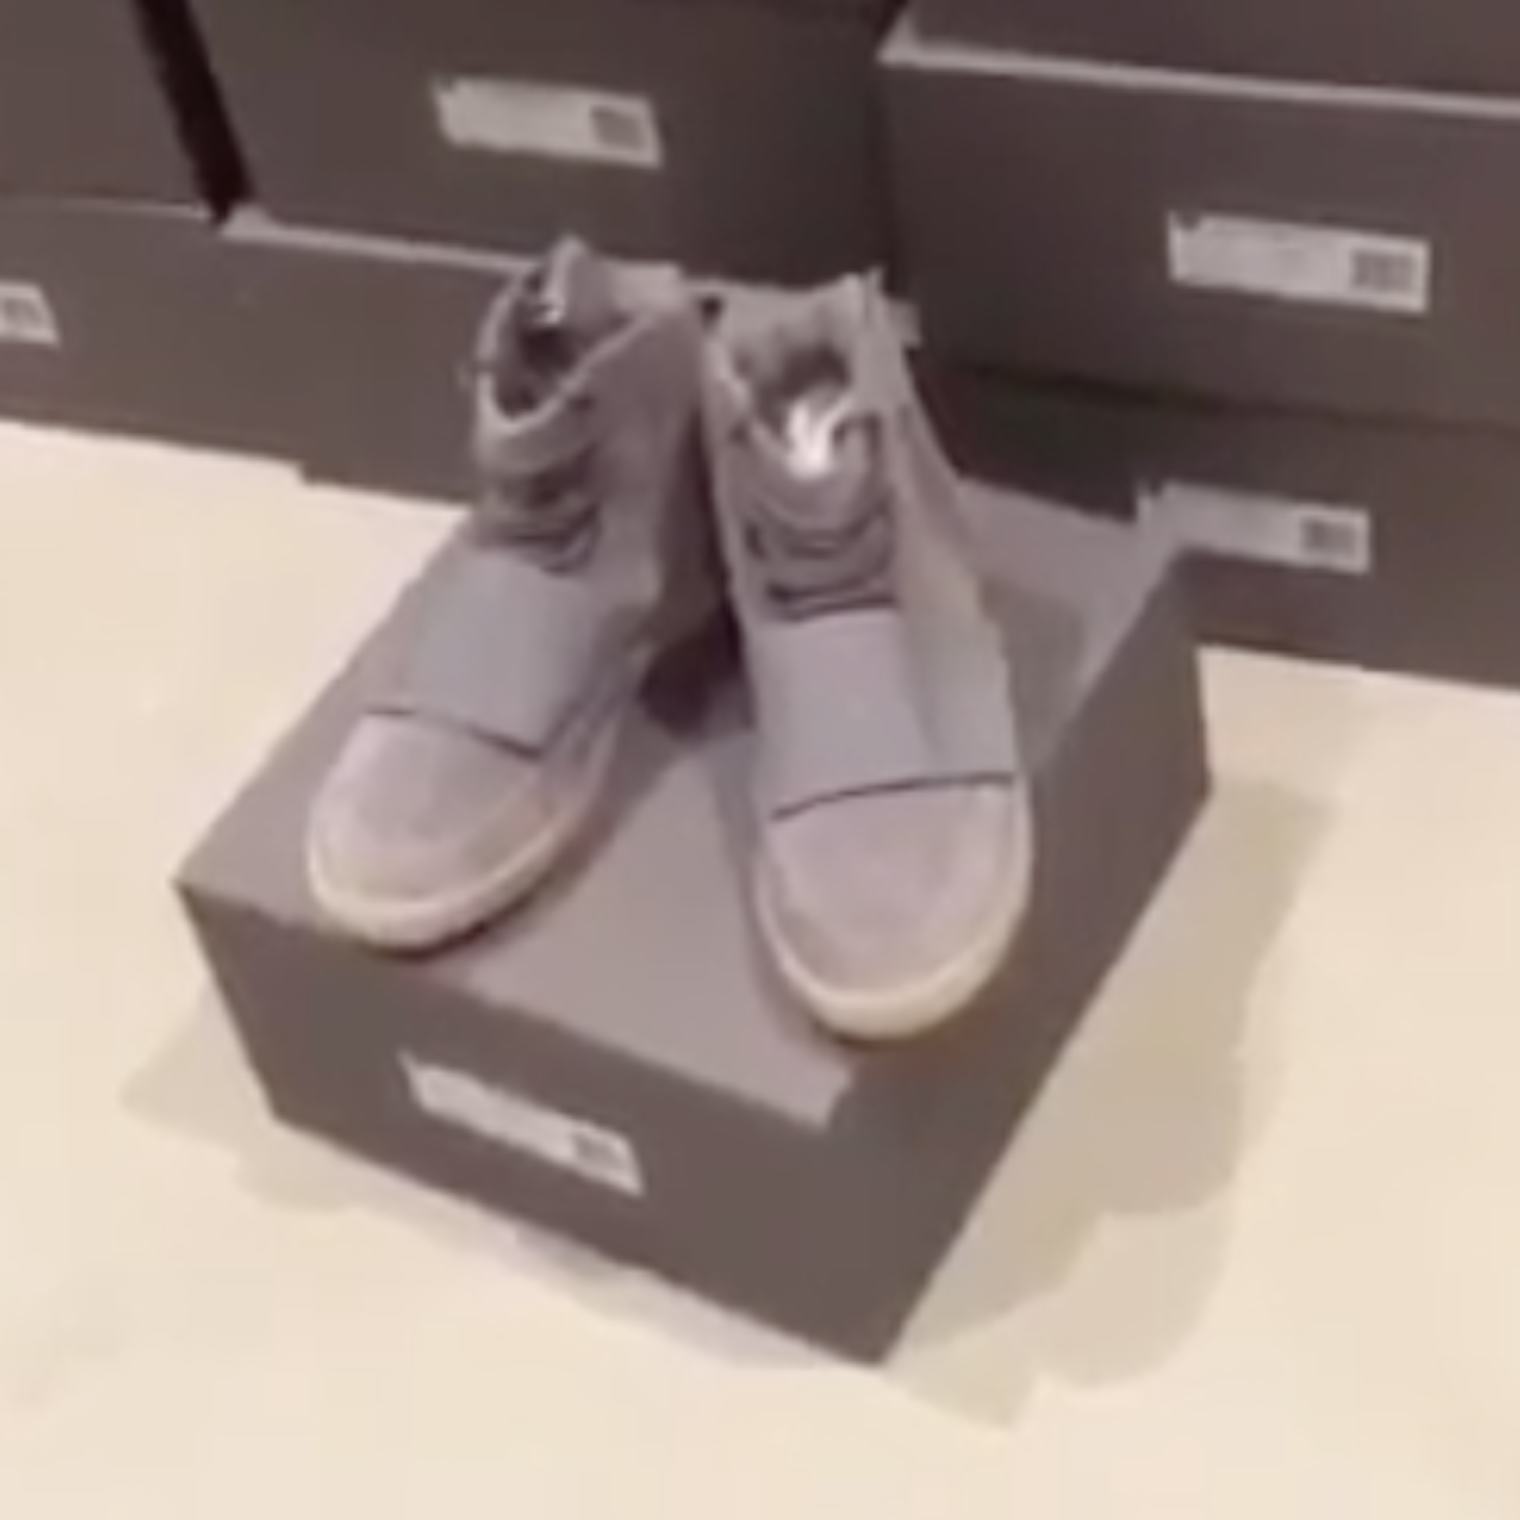 When Are The Yeezy Boosts Being Restocked? Here's What Rumors Suggest